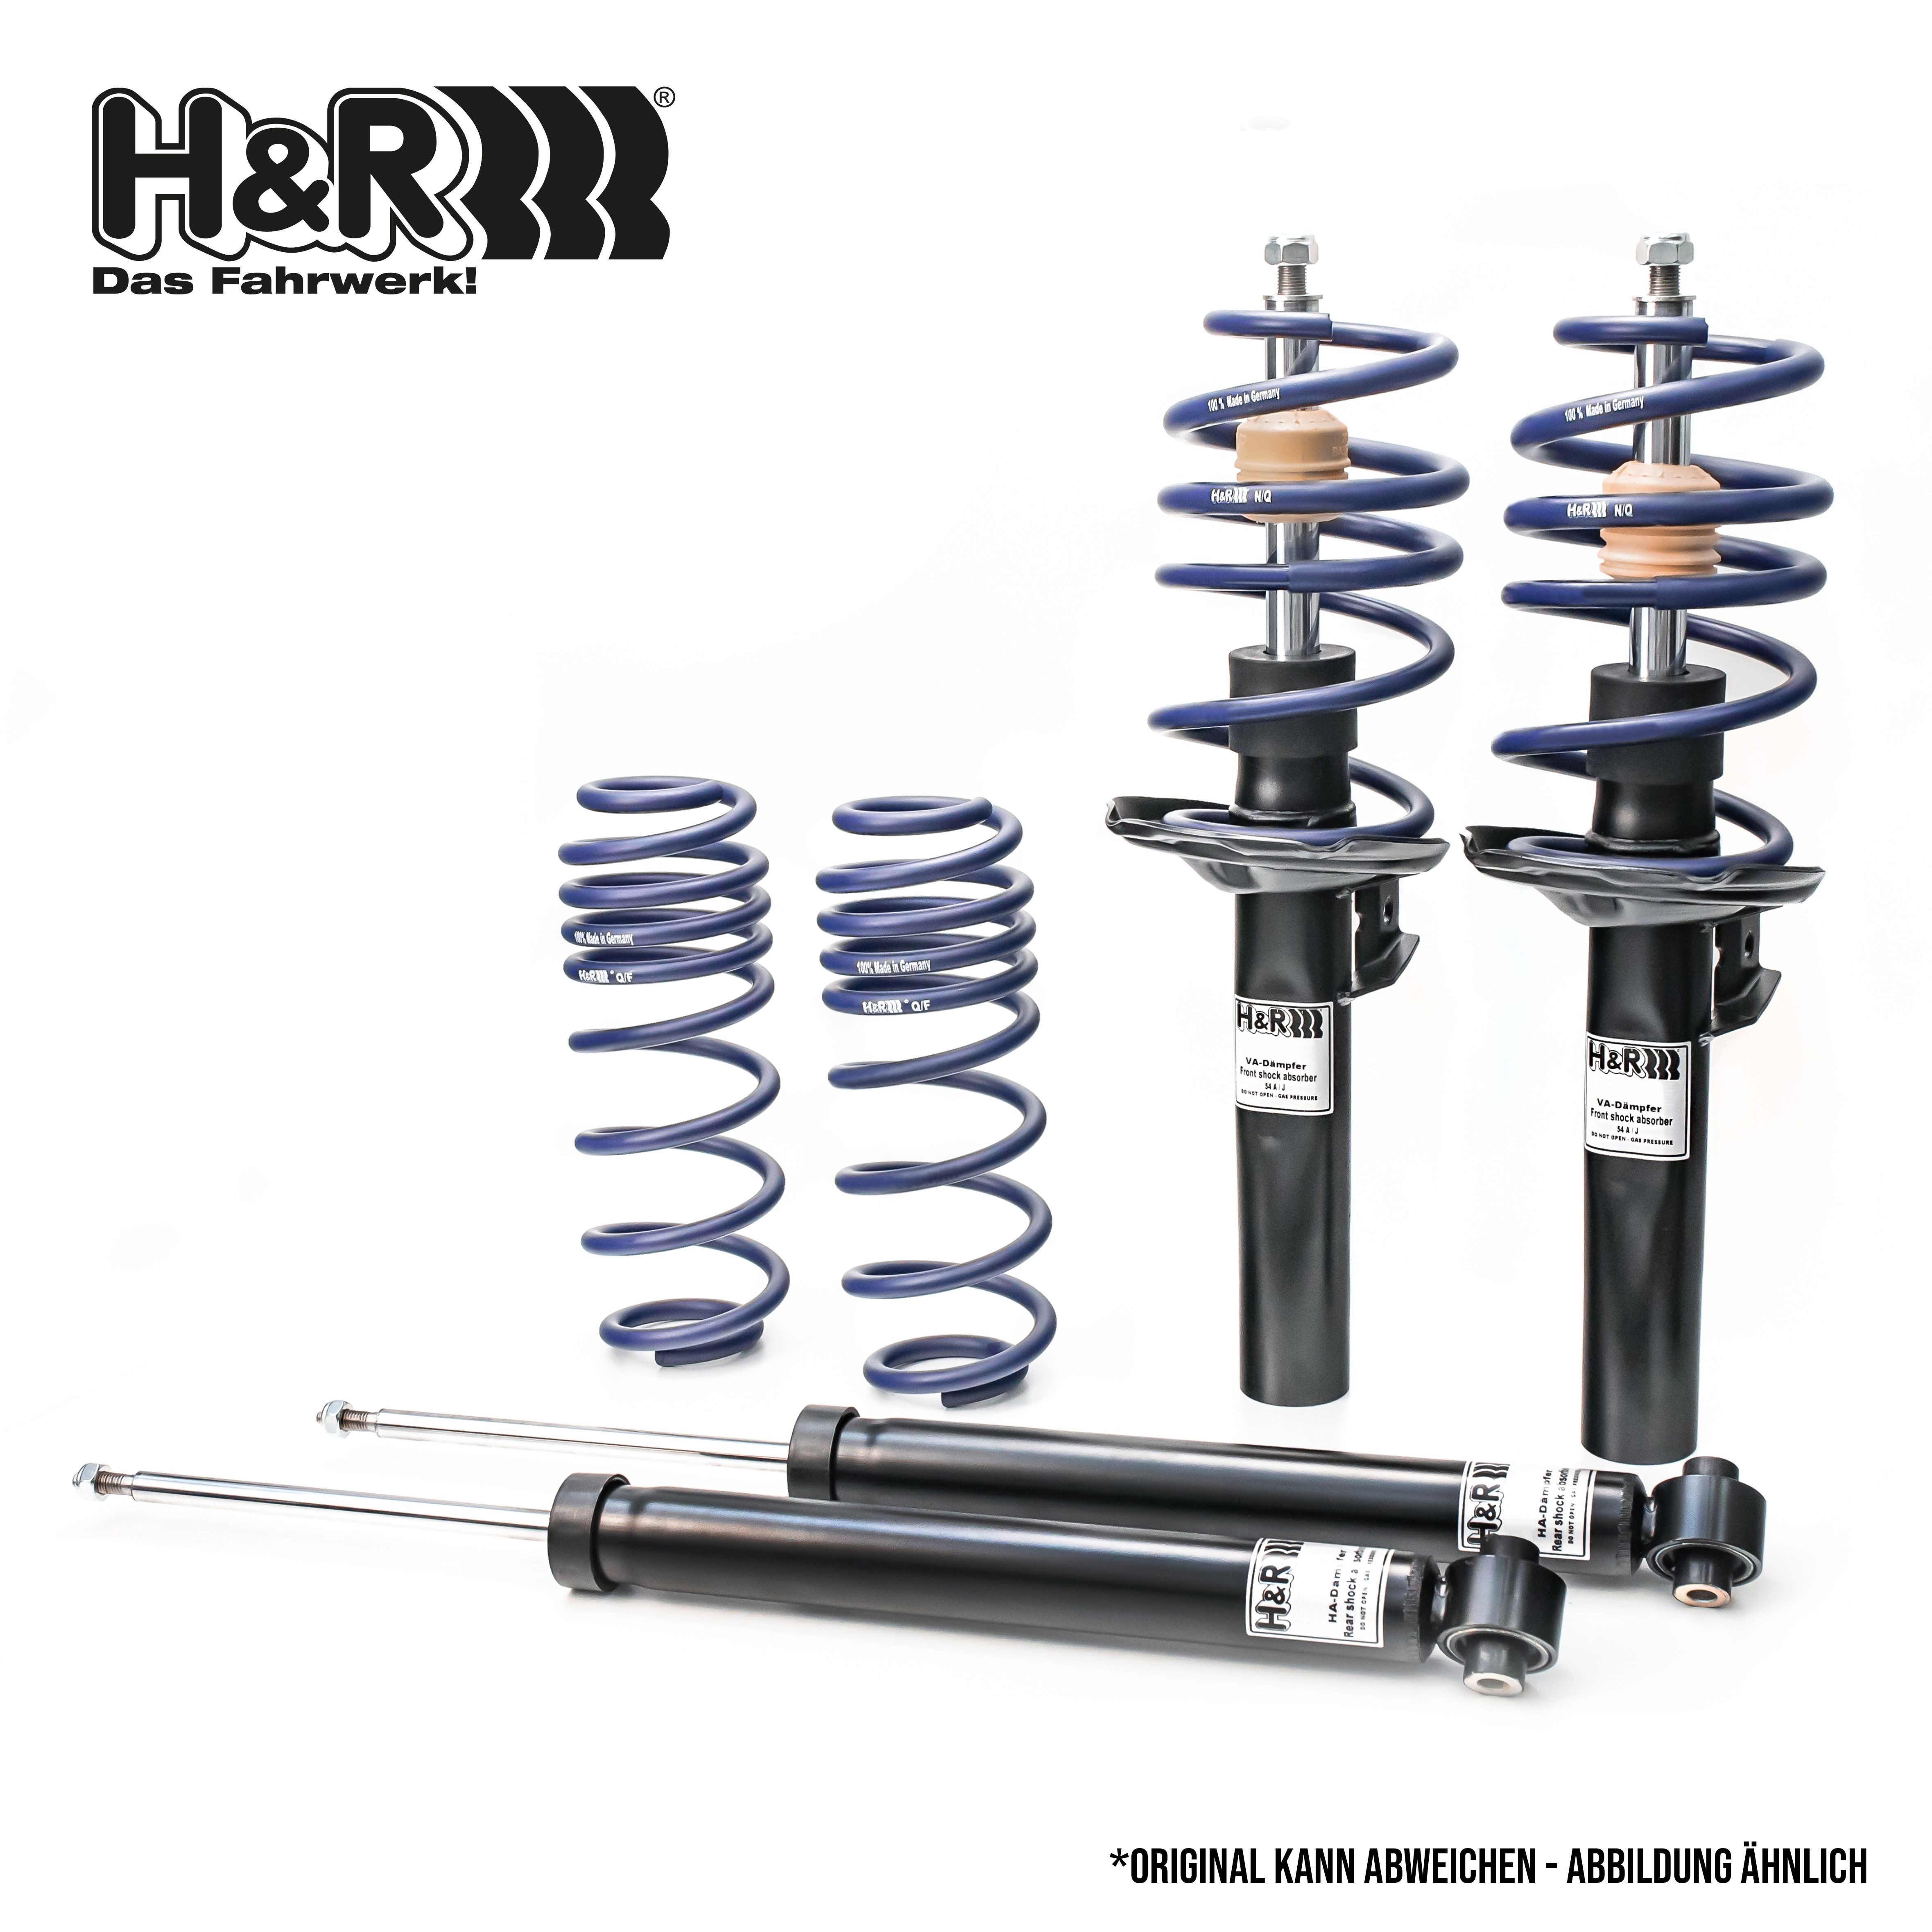 H&R Suspension kit, coil springs / shock absorbers Mercedes-Benz W210 new 40538-2